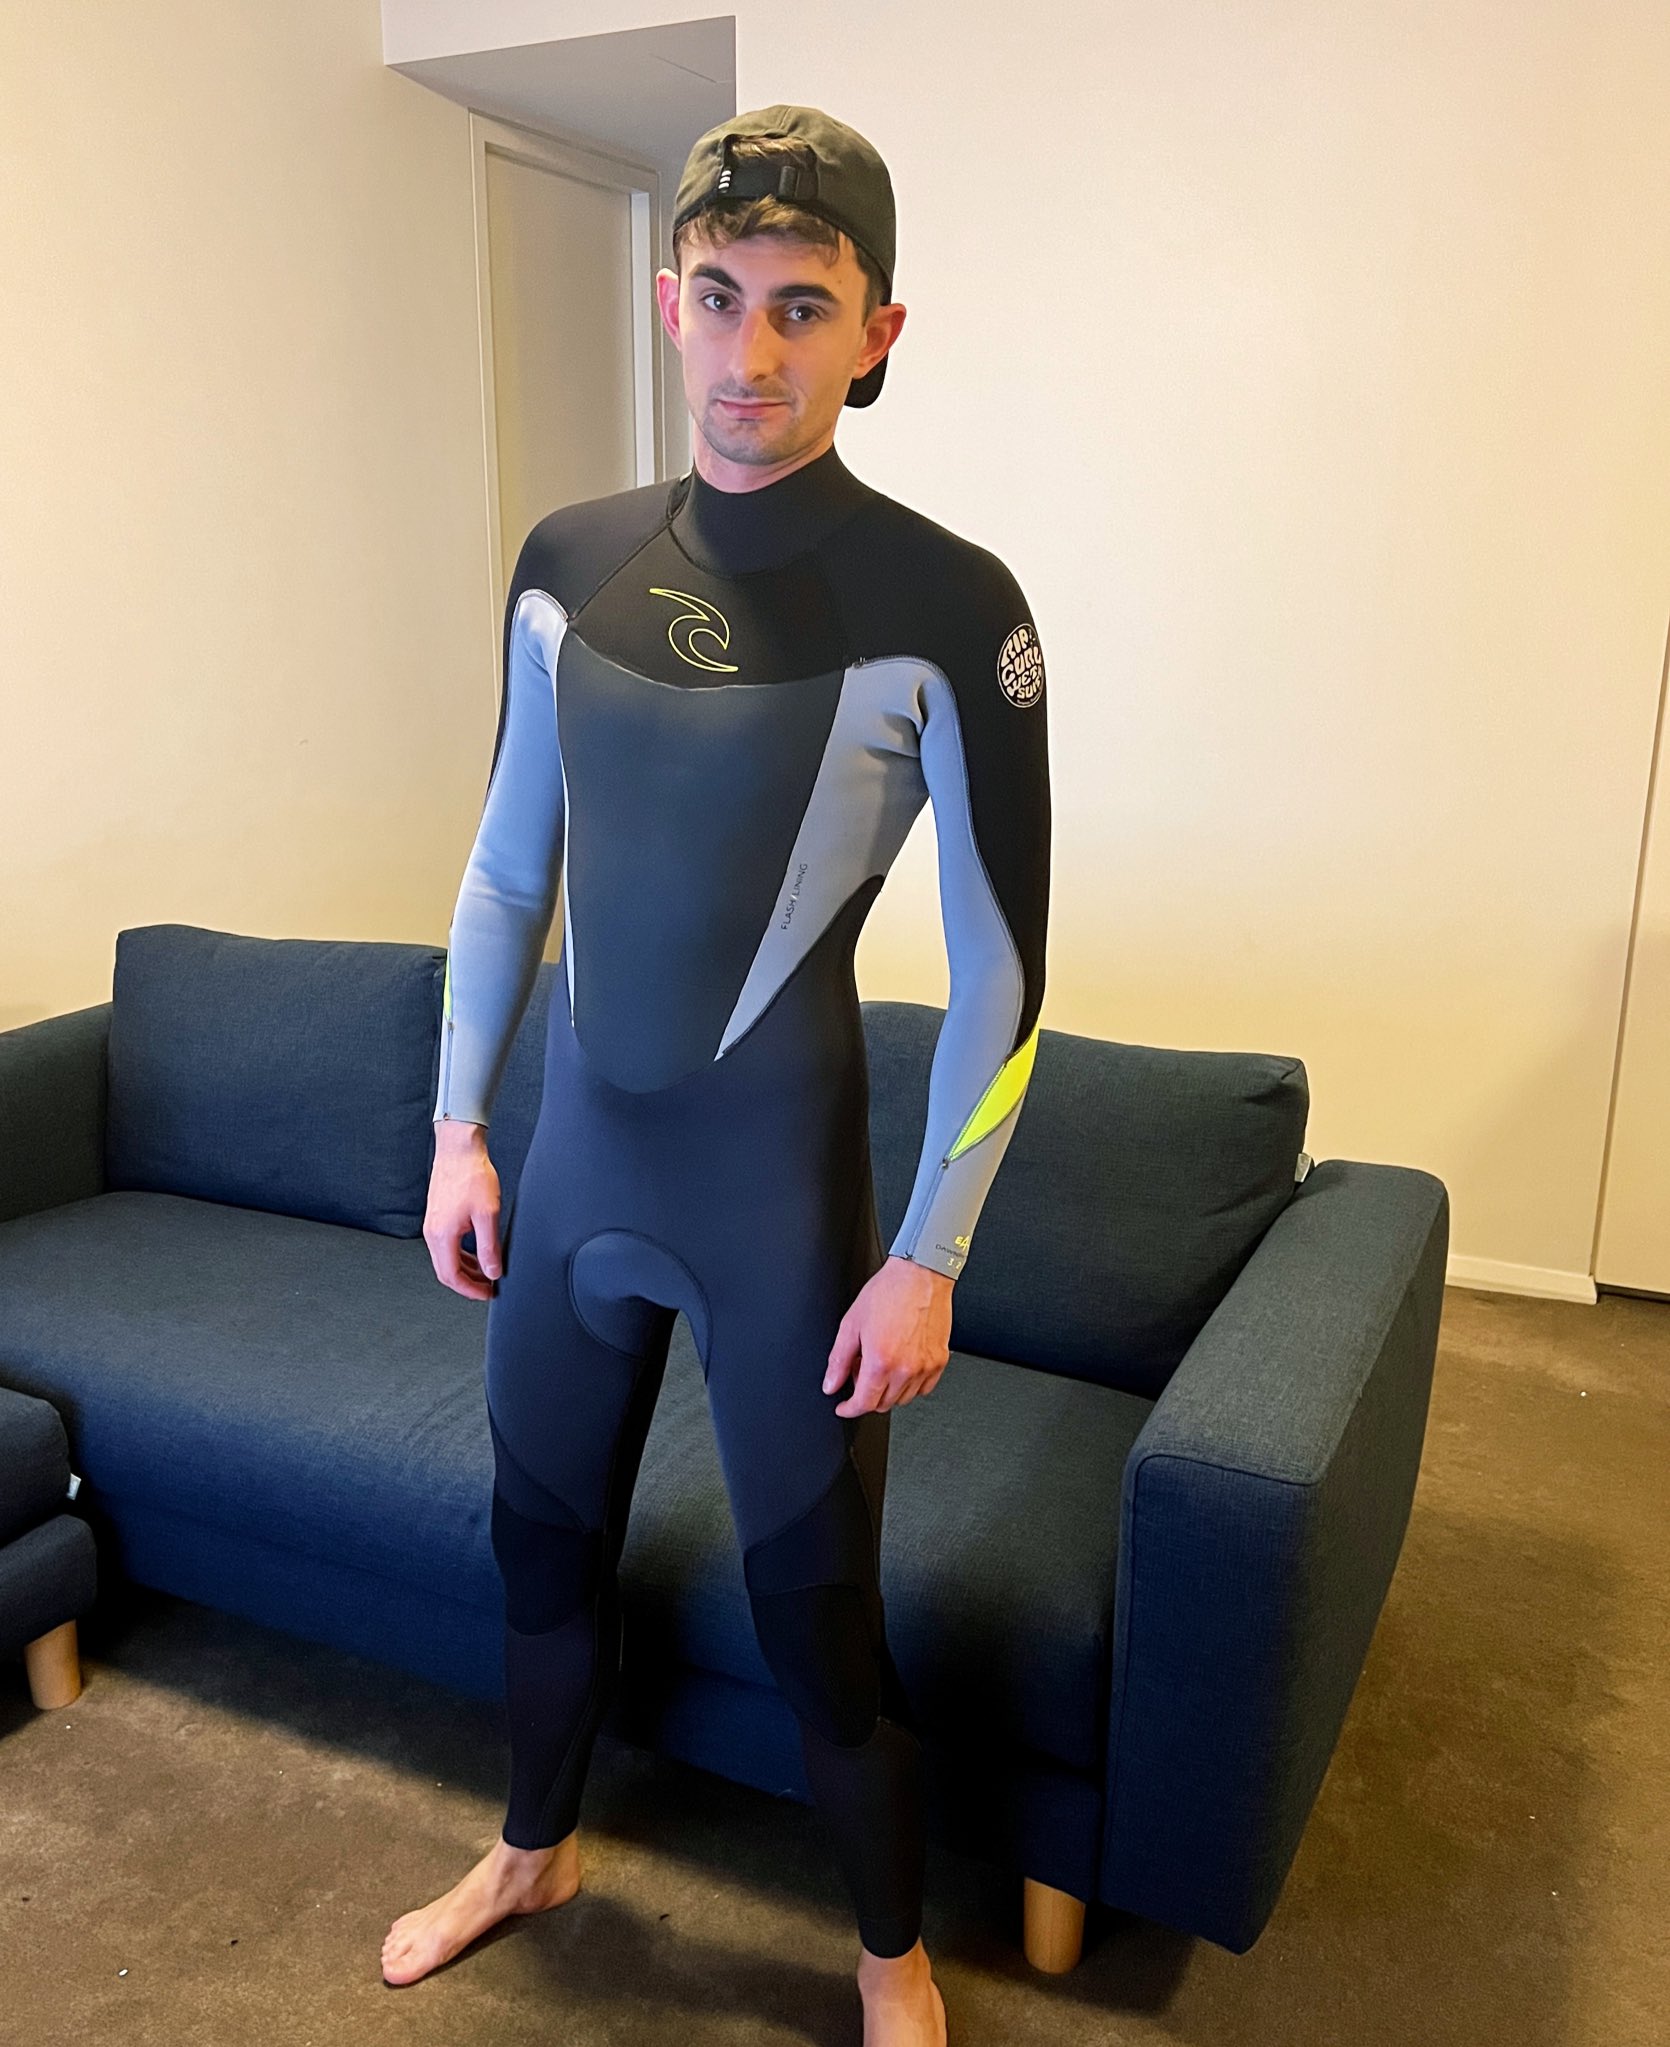 wetsuitsareawesome (@wetsuitsareawe1) / Twitter